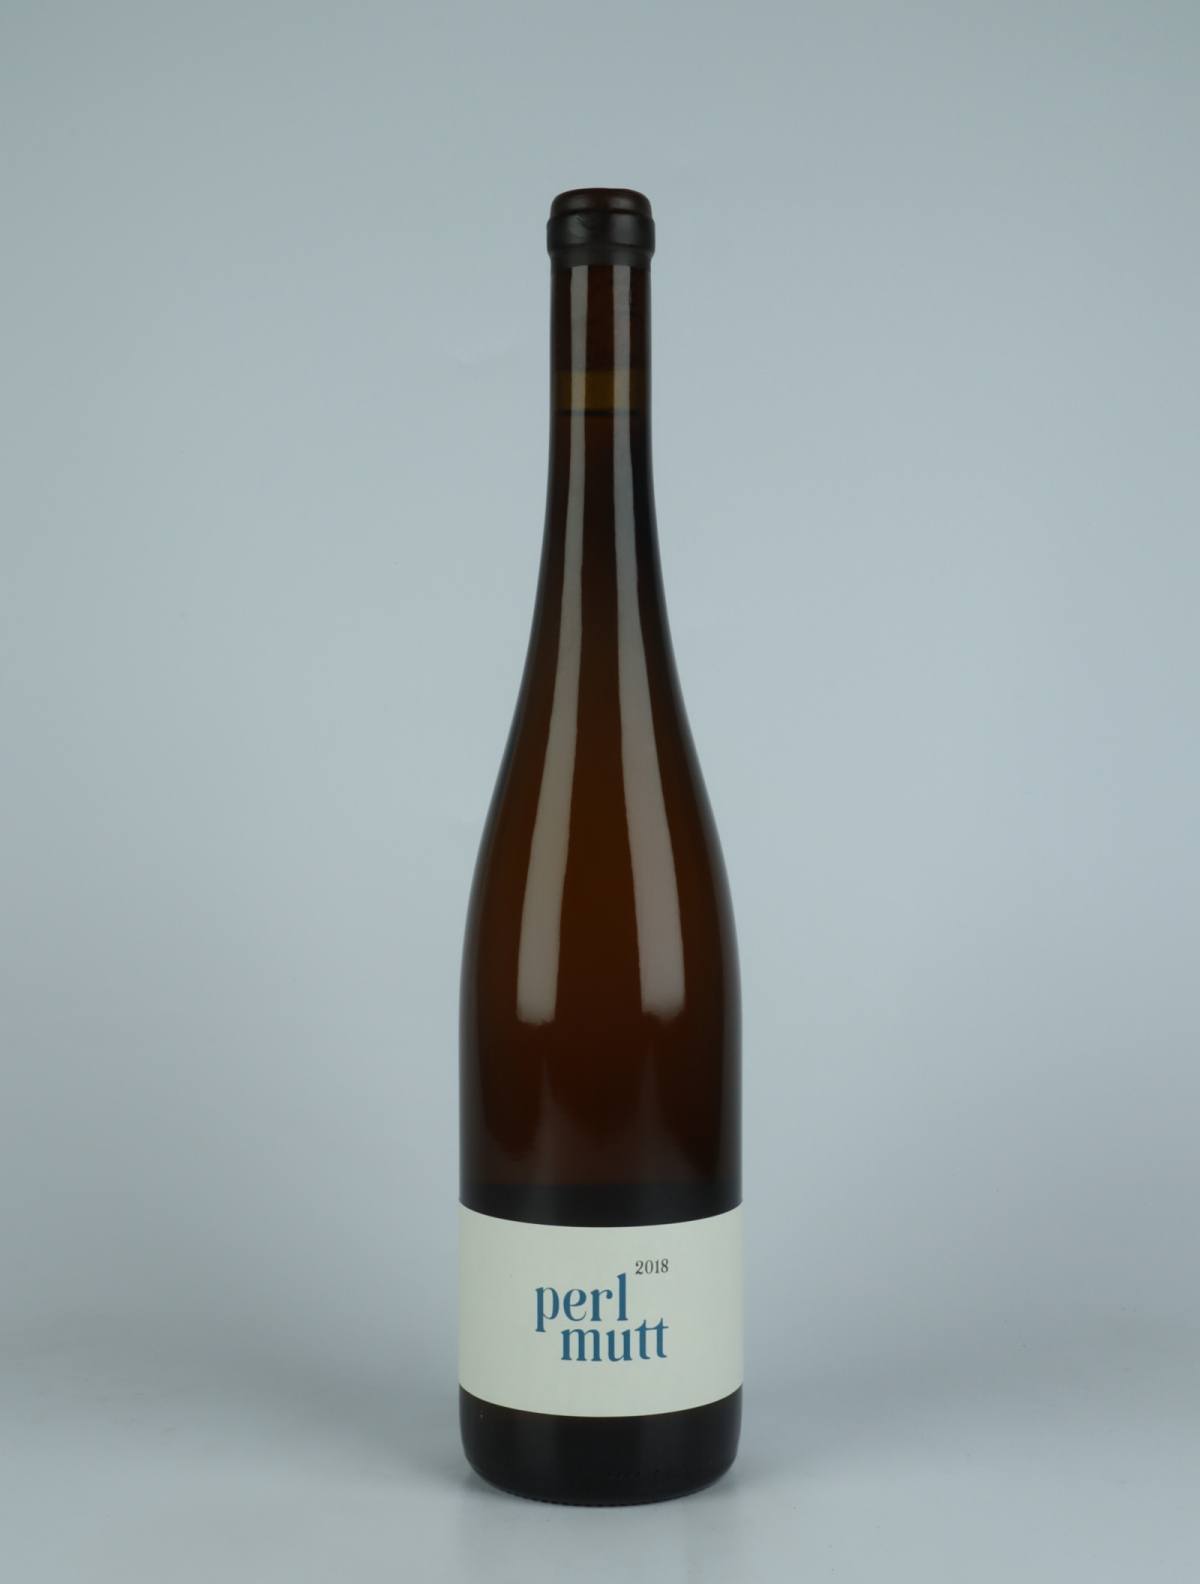 A bottle 2018 Perlmutt- 4 years élevage White wine from Jakob Tennstedt, Mosel in Germany